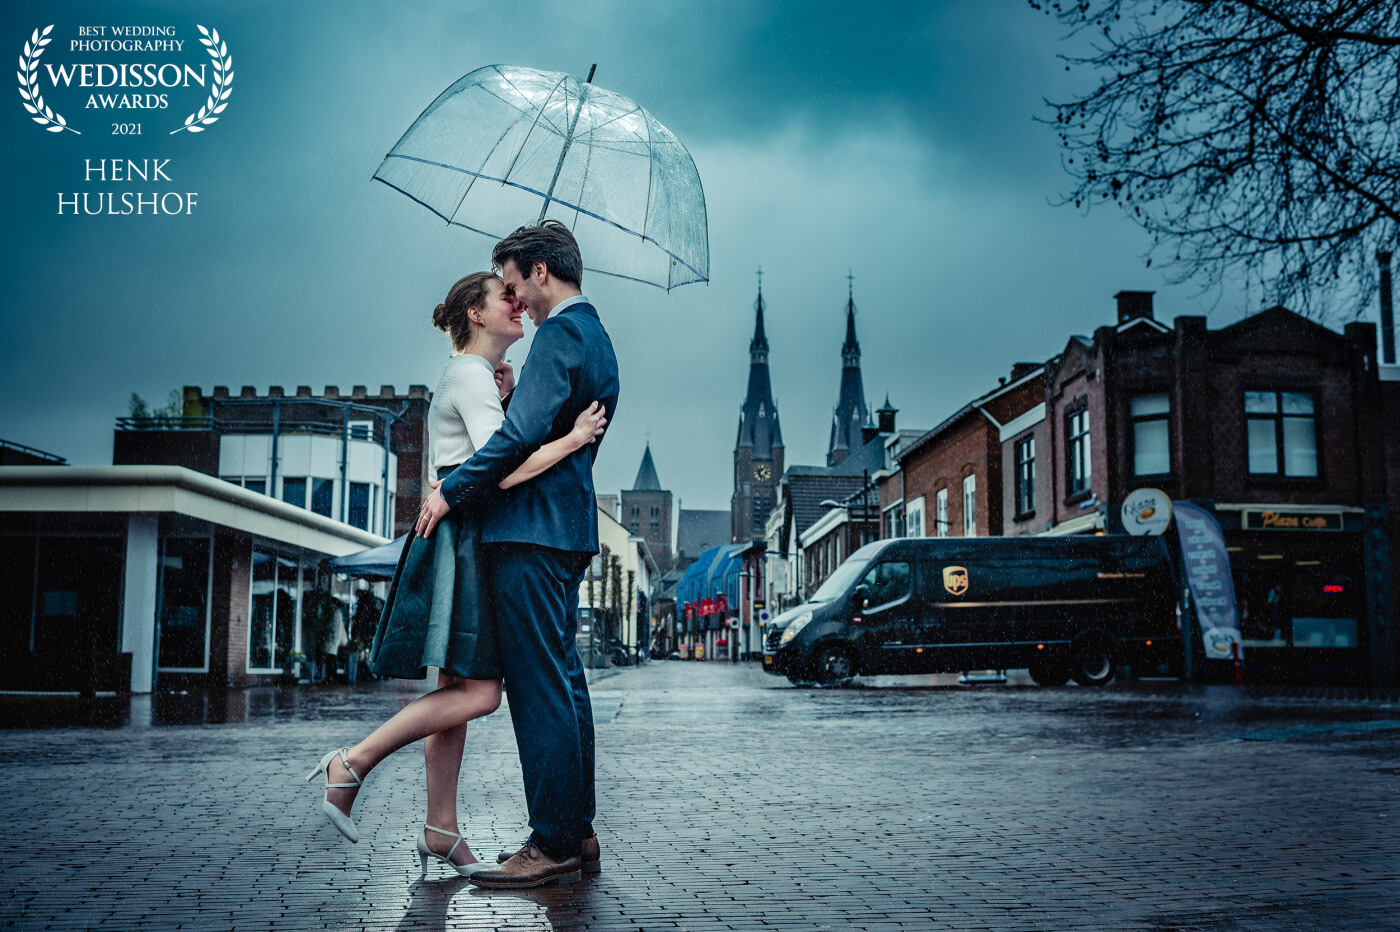 this shot was taken last week, with this wonderful couple! This was right after the wedding ceremony in Cuijk (Netherlands). <br />
I gave the couple an umbrella because the drizzle still hasn't stopped